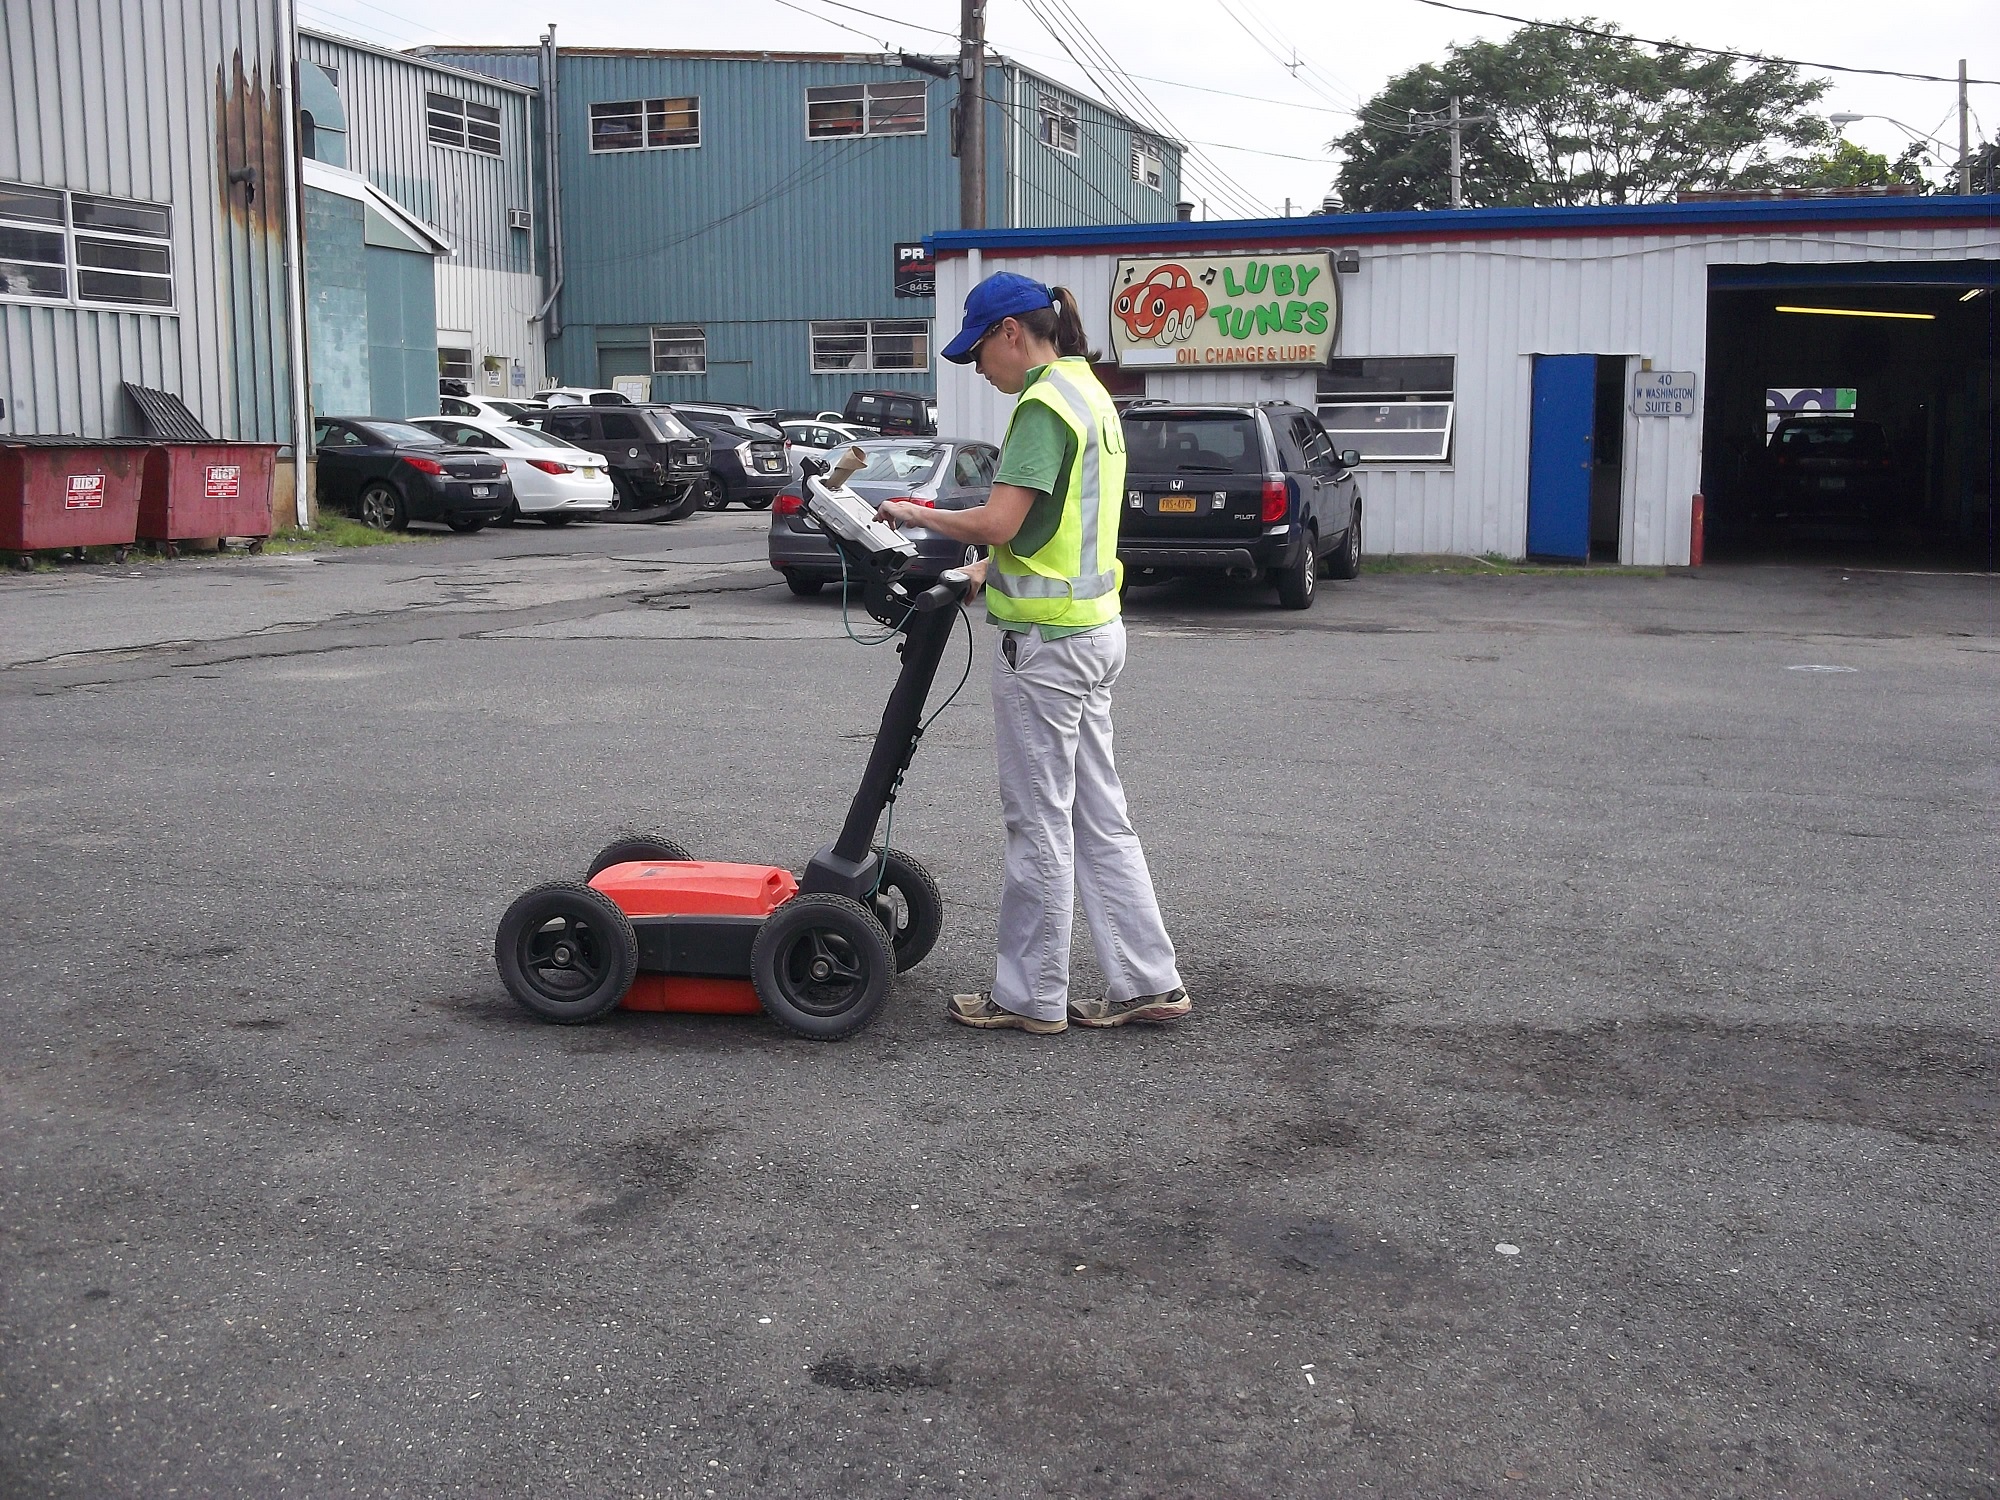 GPR site survey services in the Hudson Valley area c2g